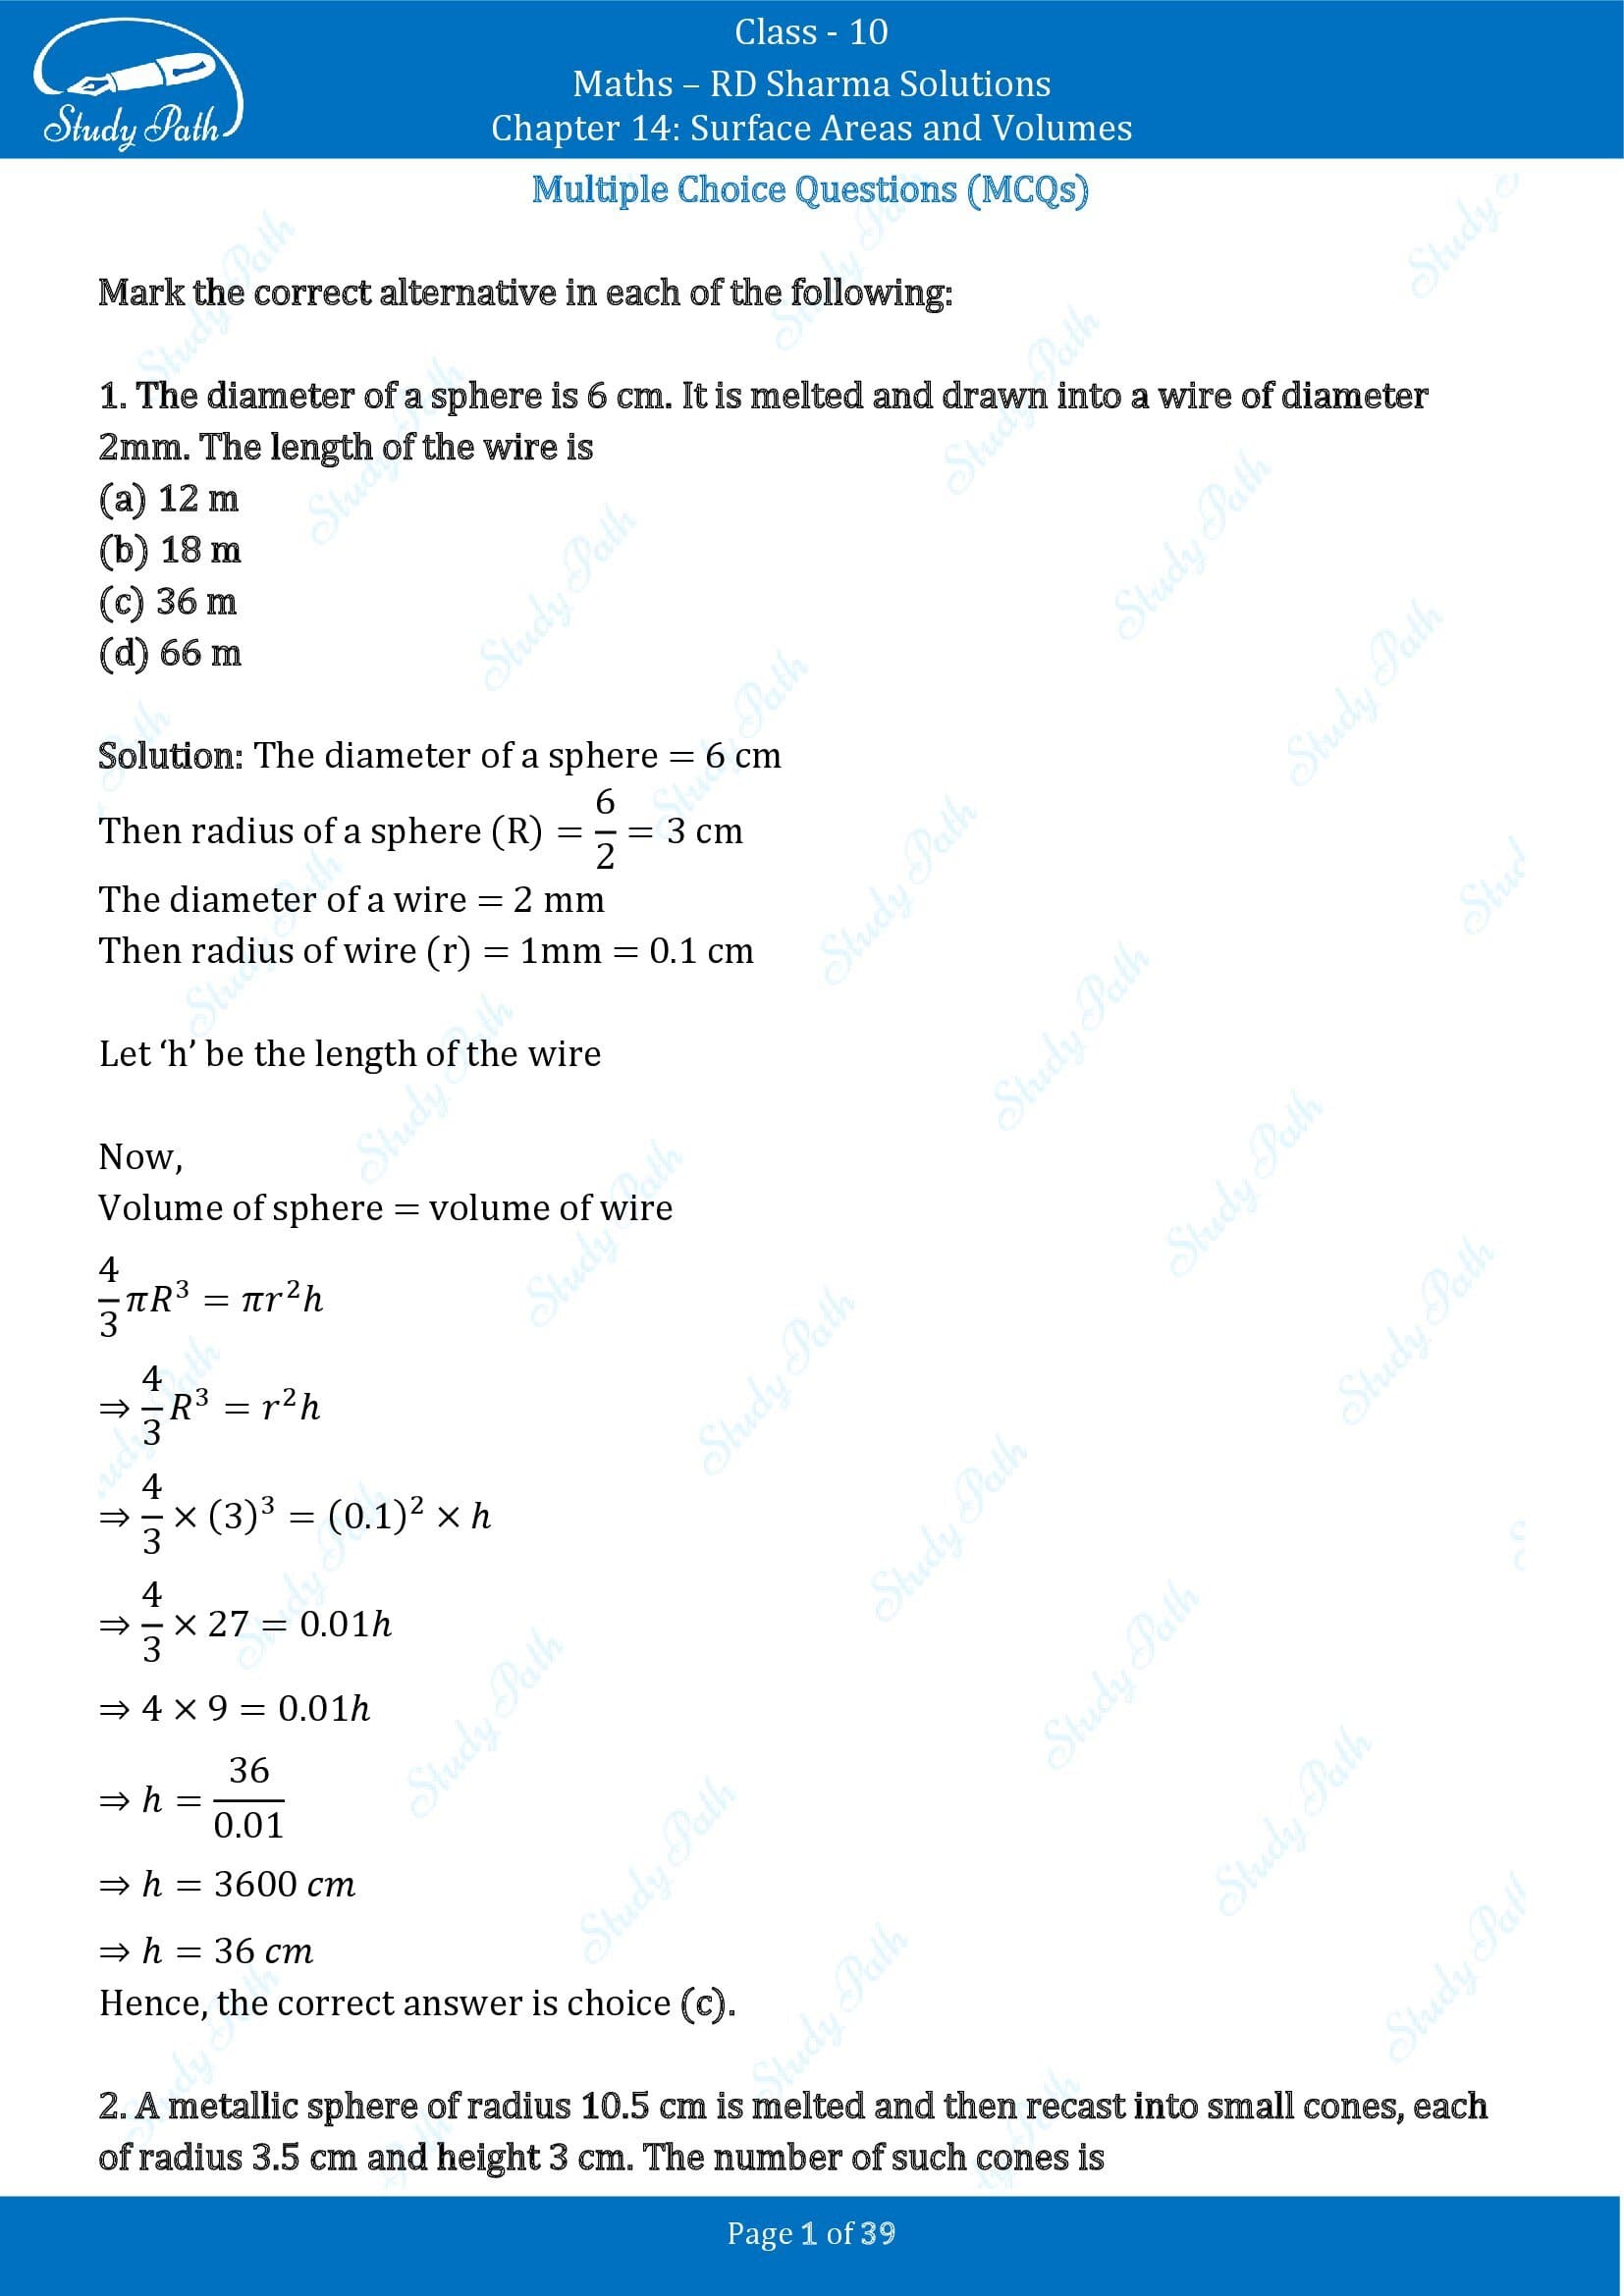 RD Sharma Solutions Class 10 Chapter 14 Surface Areas and Volumes Multiple Choice Question MCQs 00001